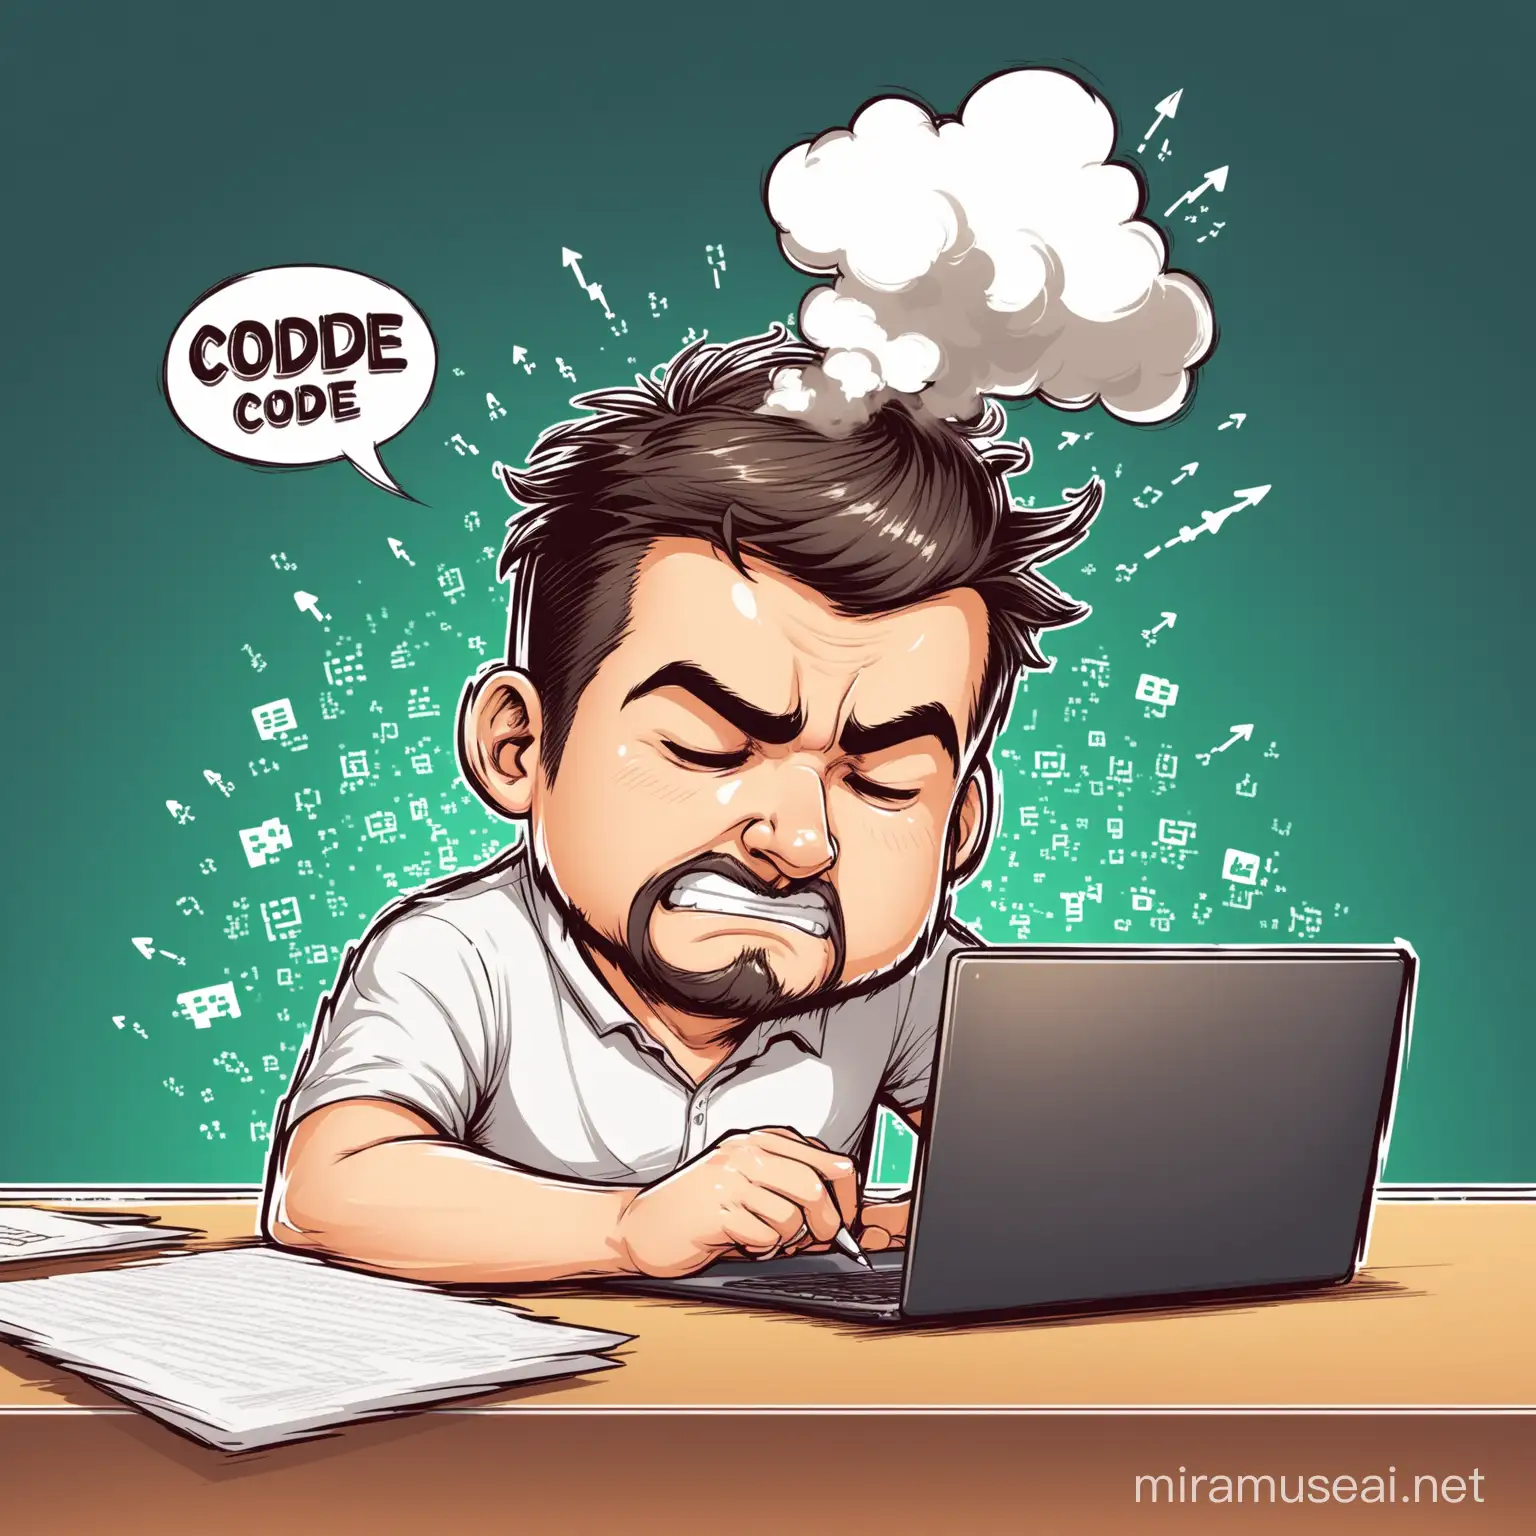 DEVELOPER WRITING CODE, STEAM GOING OUT FROM HIS HEAD, BUSY WORKING WITH LAPTOP,
 CARICATURE, FUNNY
